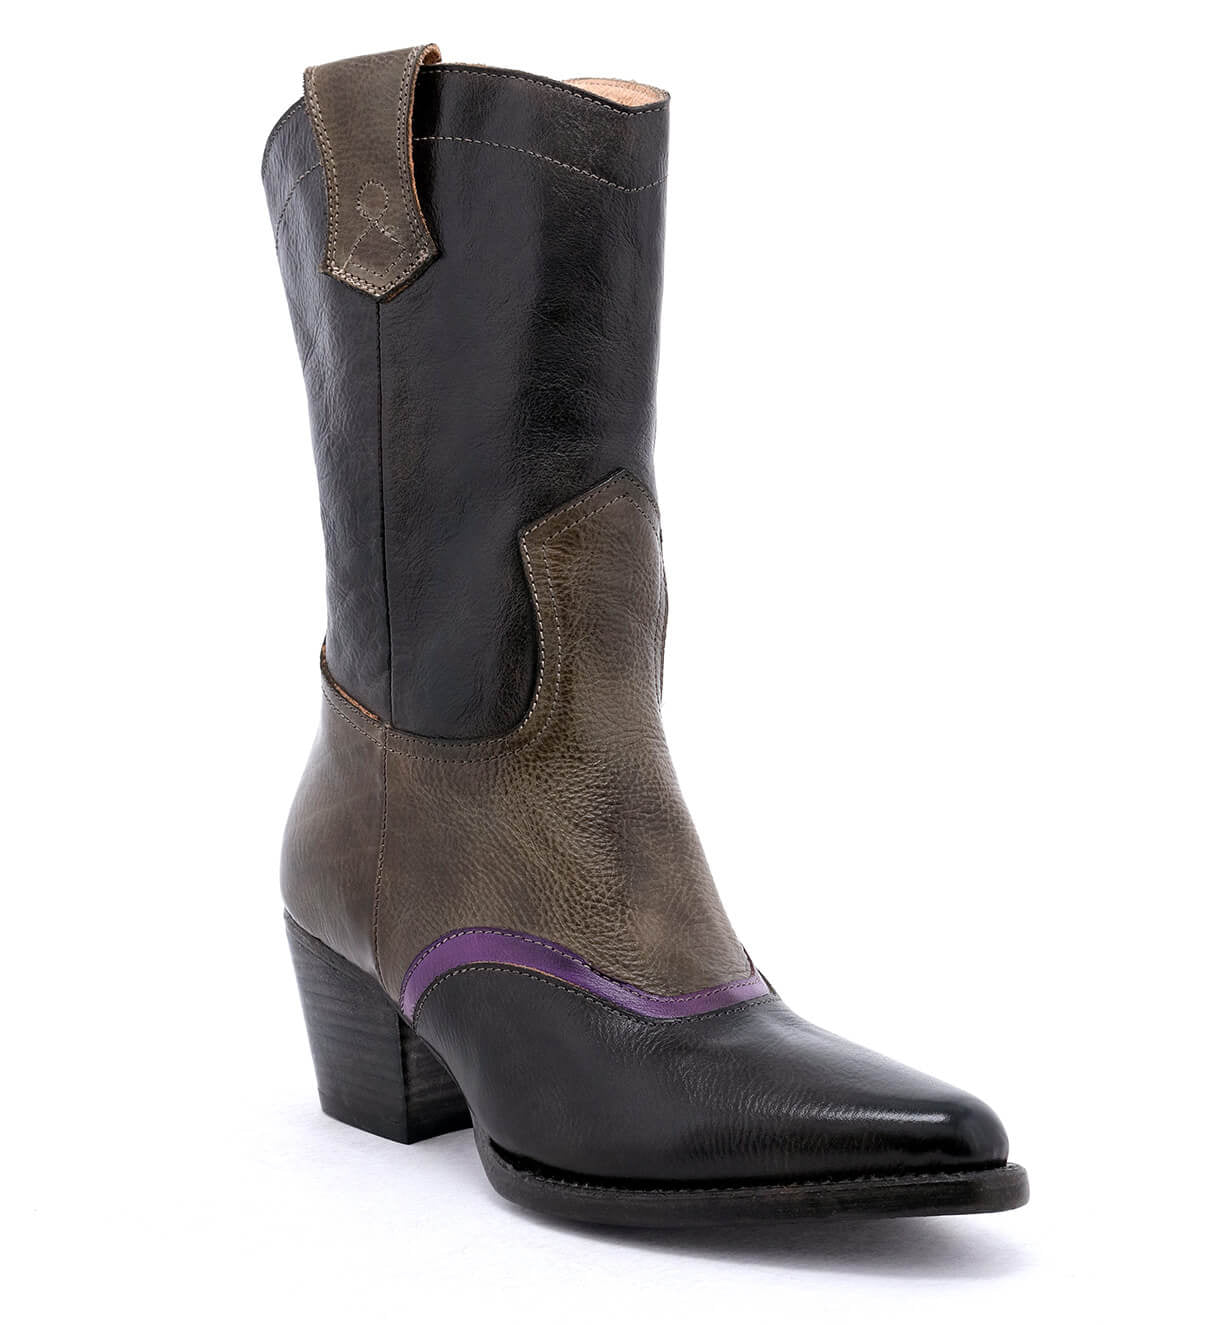 A women's black and purple Oak Tree Farms cowboy boot with a pointed toe, on a white background.